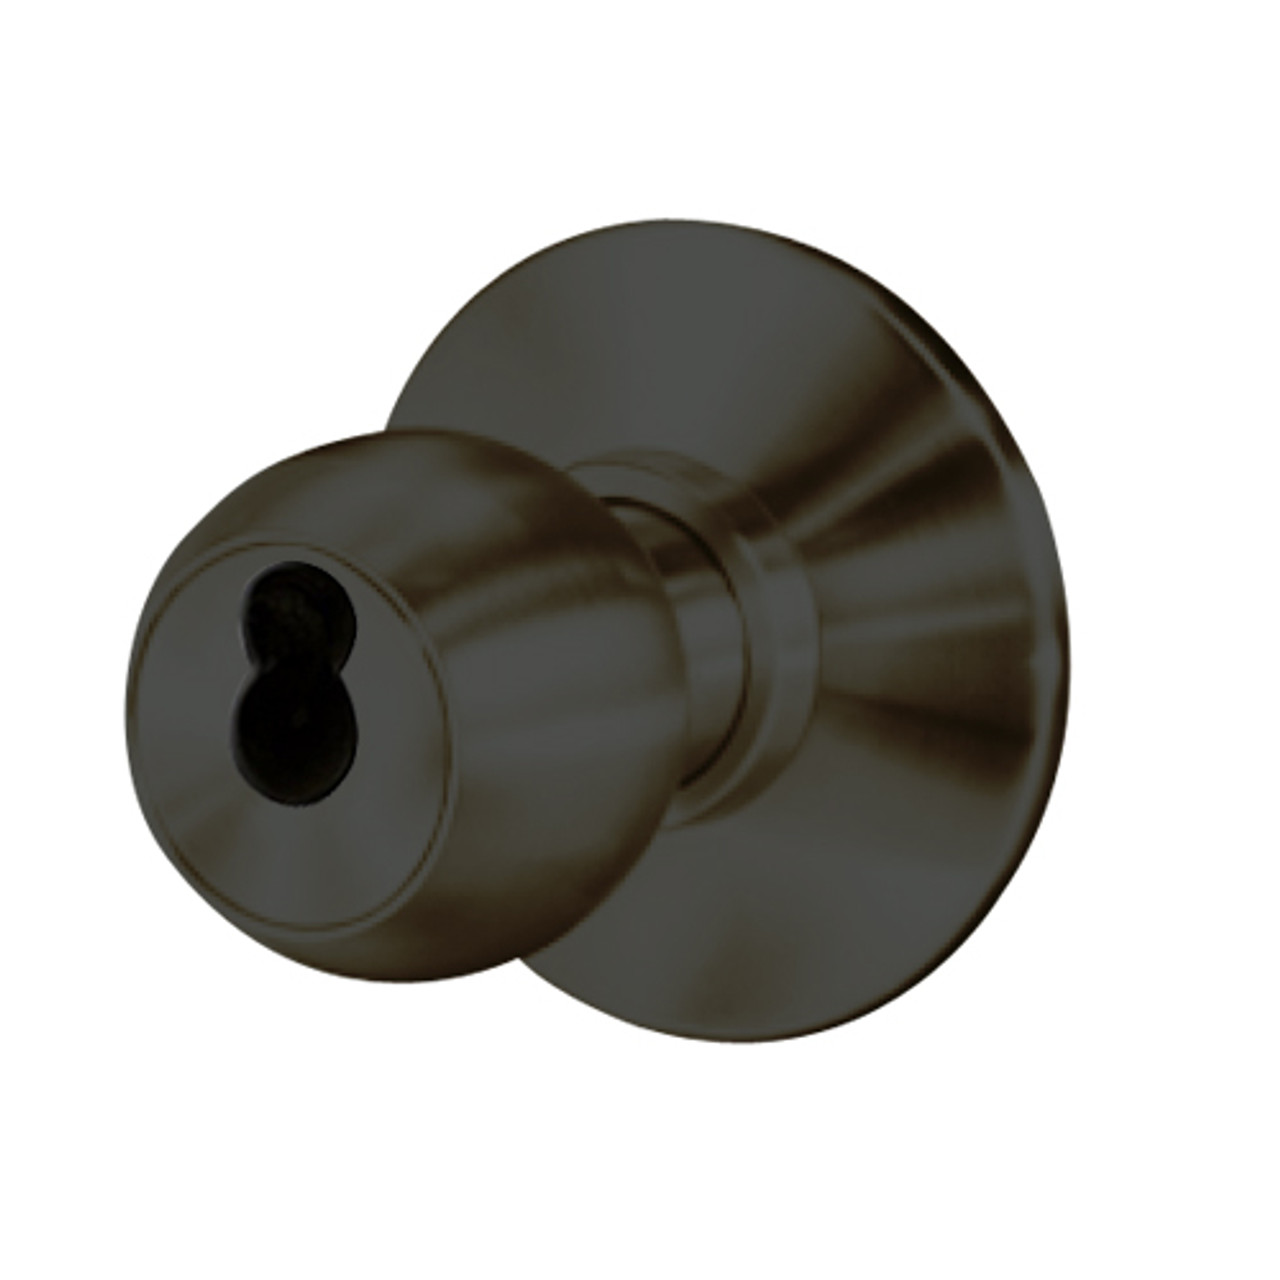 8K37XR4DS3613 Best 8K Series Special Heavy Duty Cylindrical Knob Locks with Round Style in Oil Rubbed Bronze